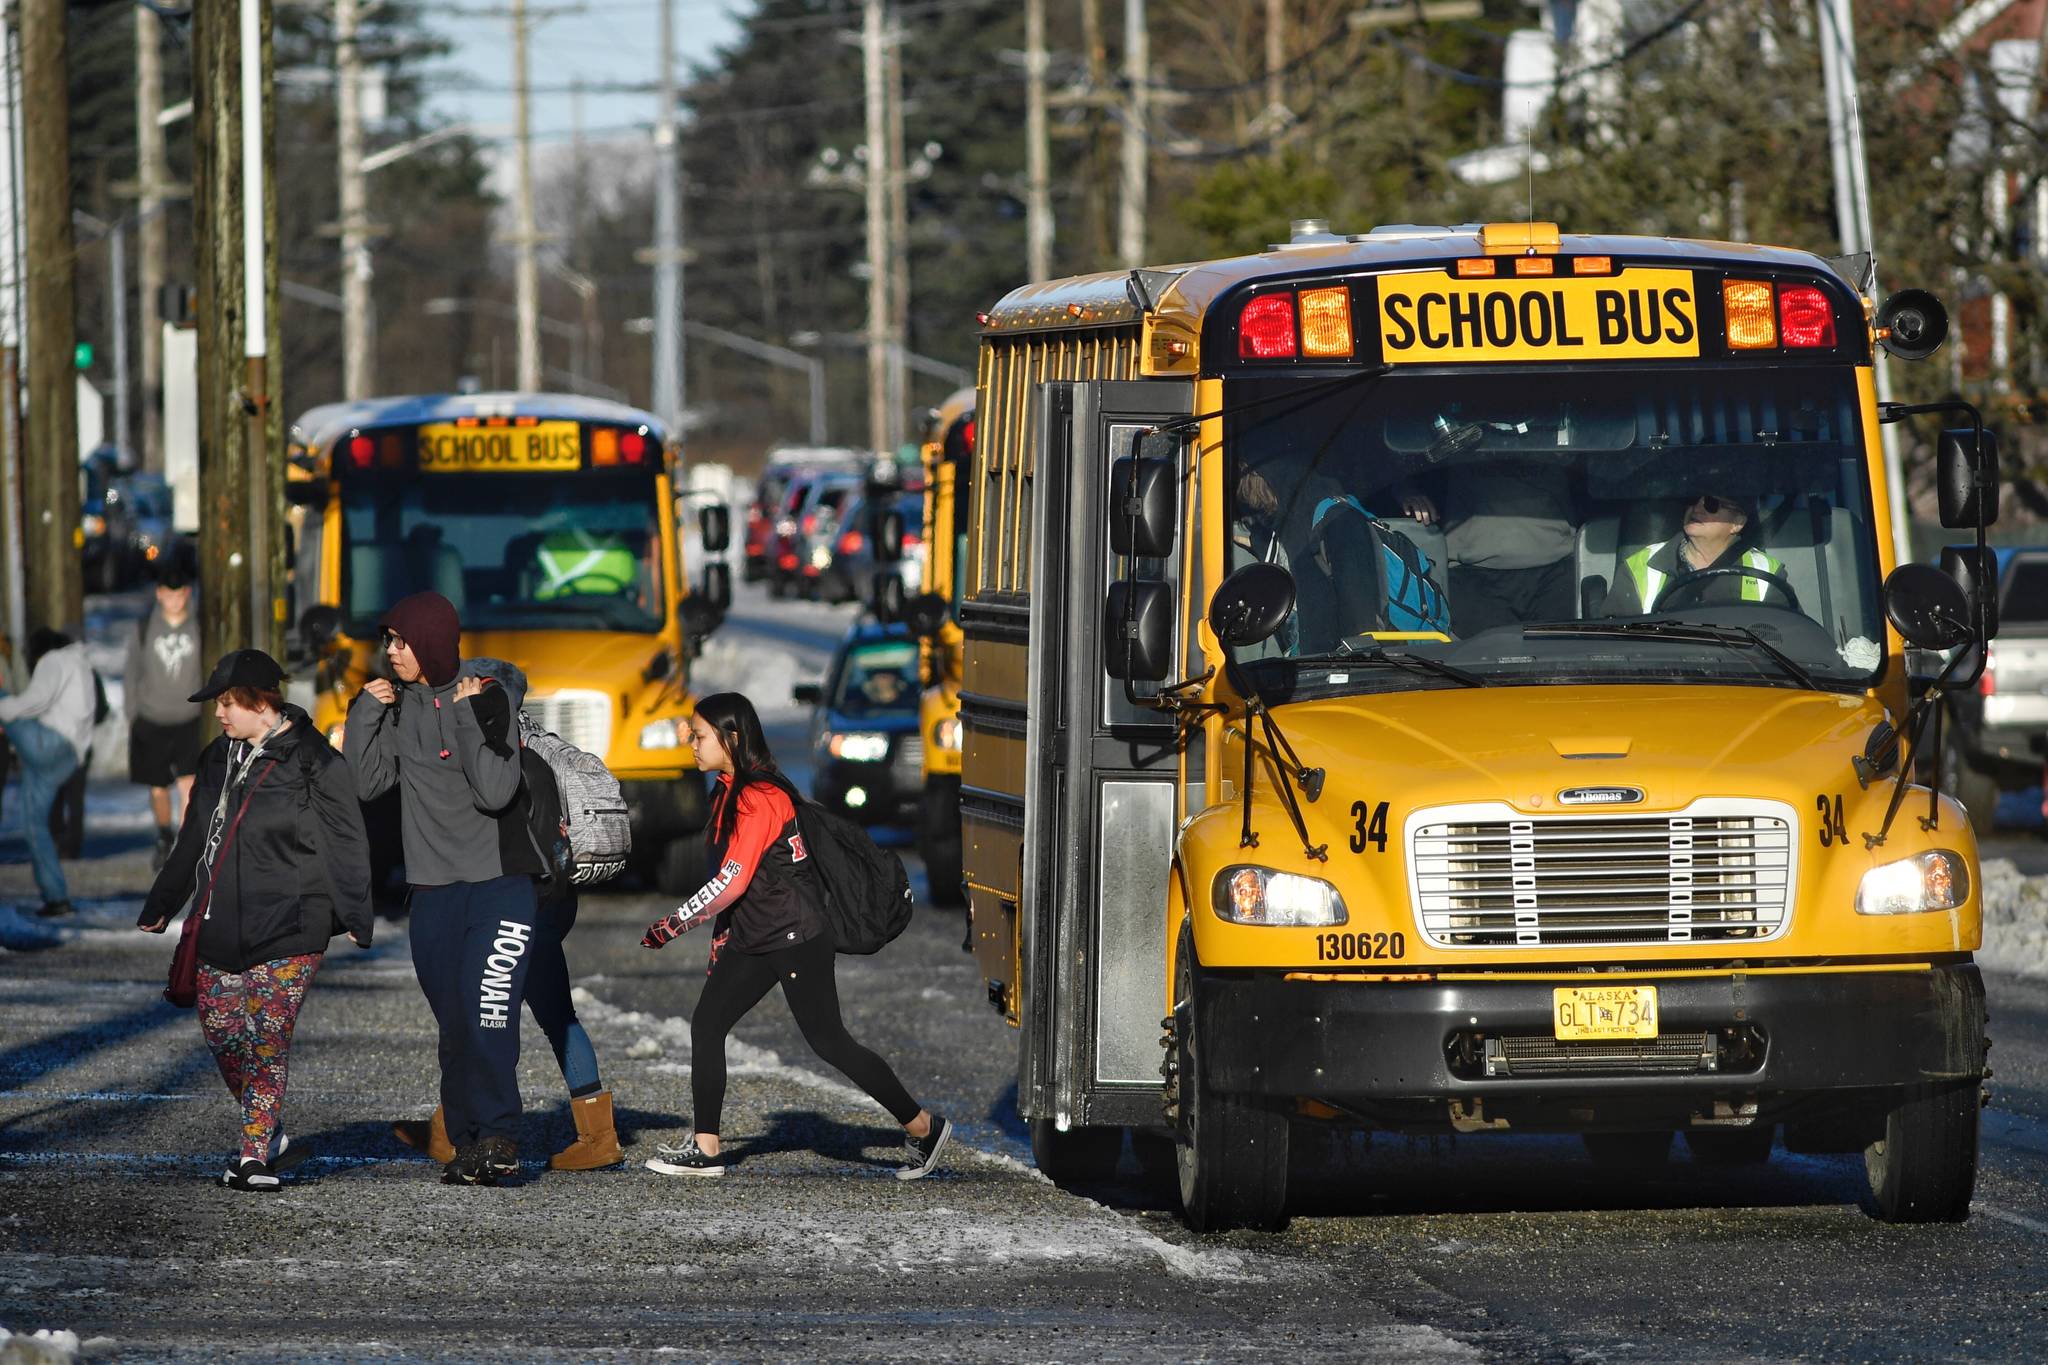 Buses deliver students to Juneau-Douglas High School: Yadaa.at Kalé on Wednesday, Feb. 20, 2019. The Juneau School District is facing cuts to next year’s budget that may lead to the layoffs of over 100 staff. (Michael Penn | Juneau Empire)